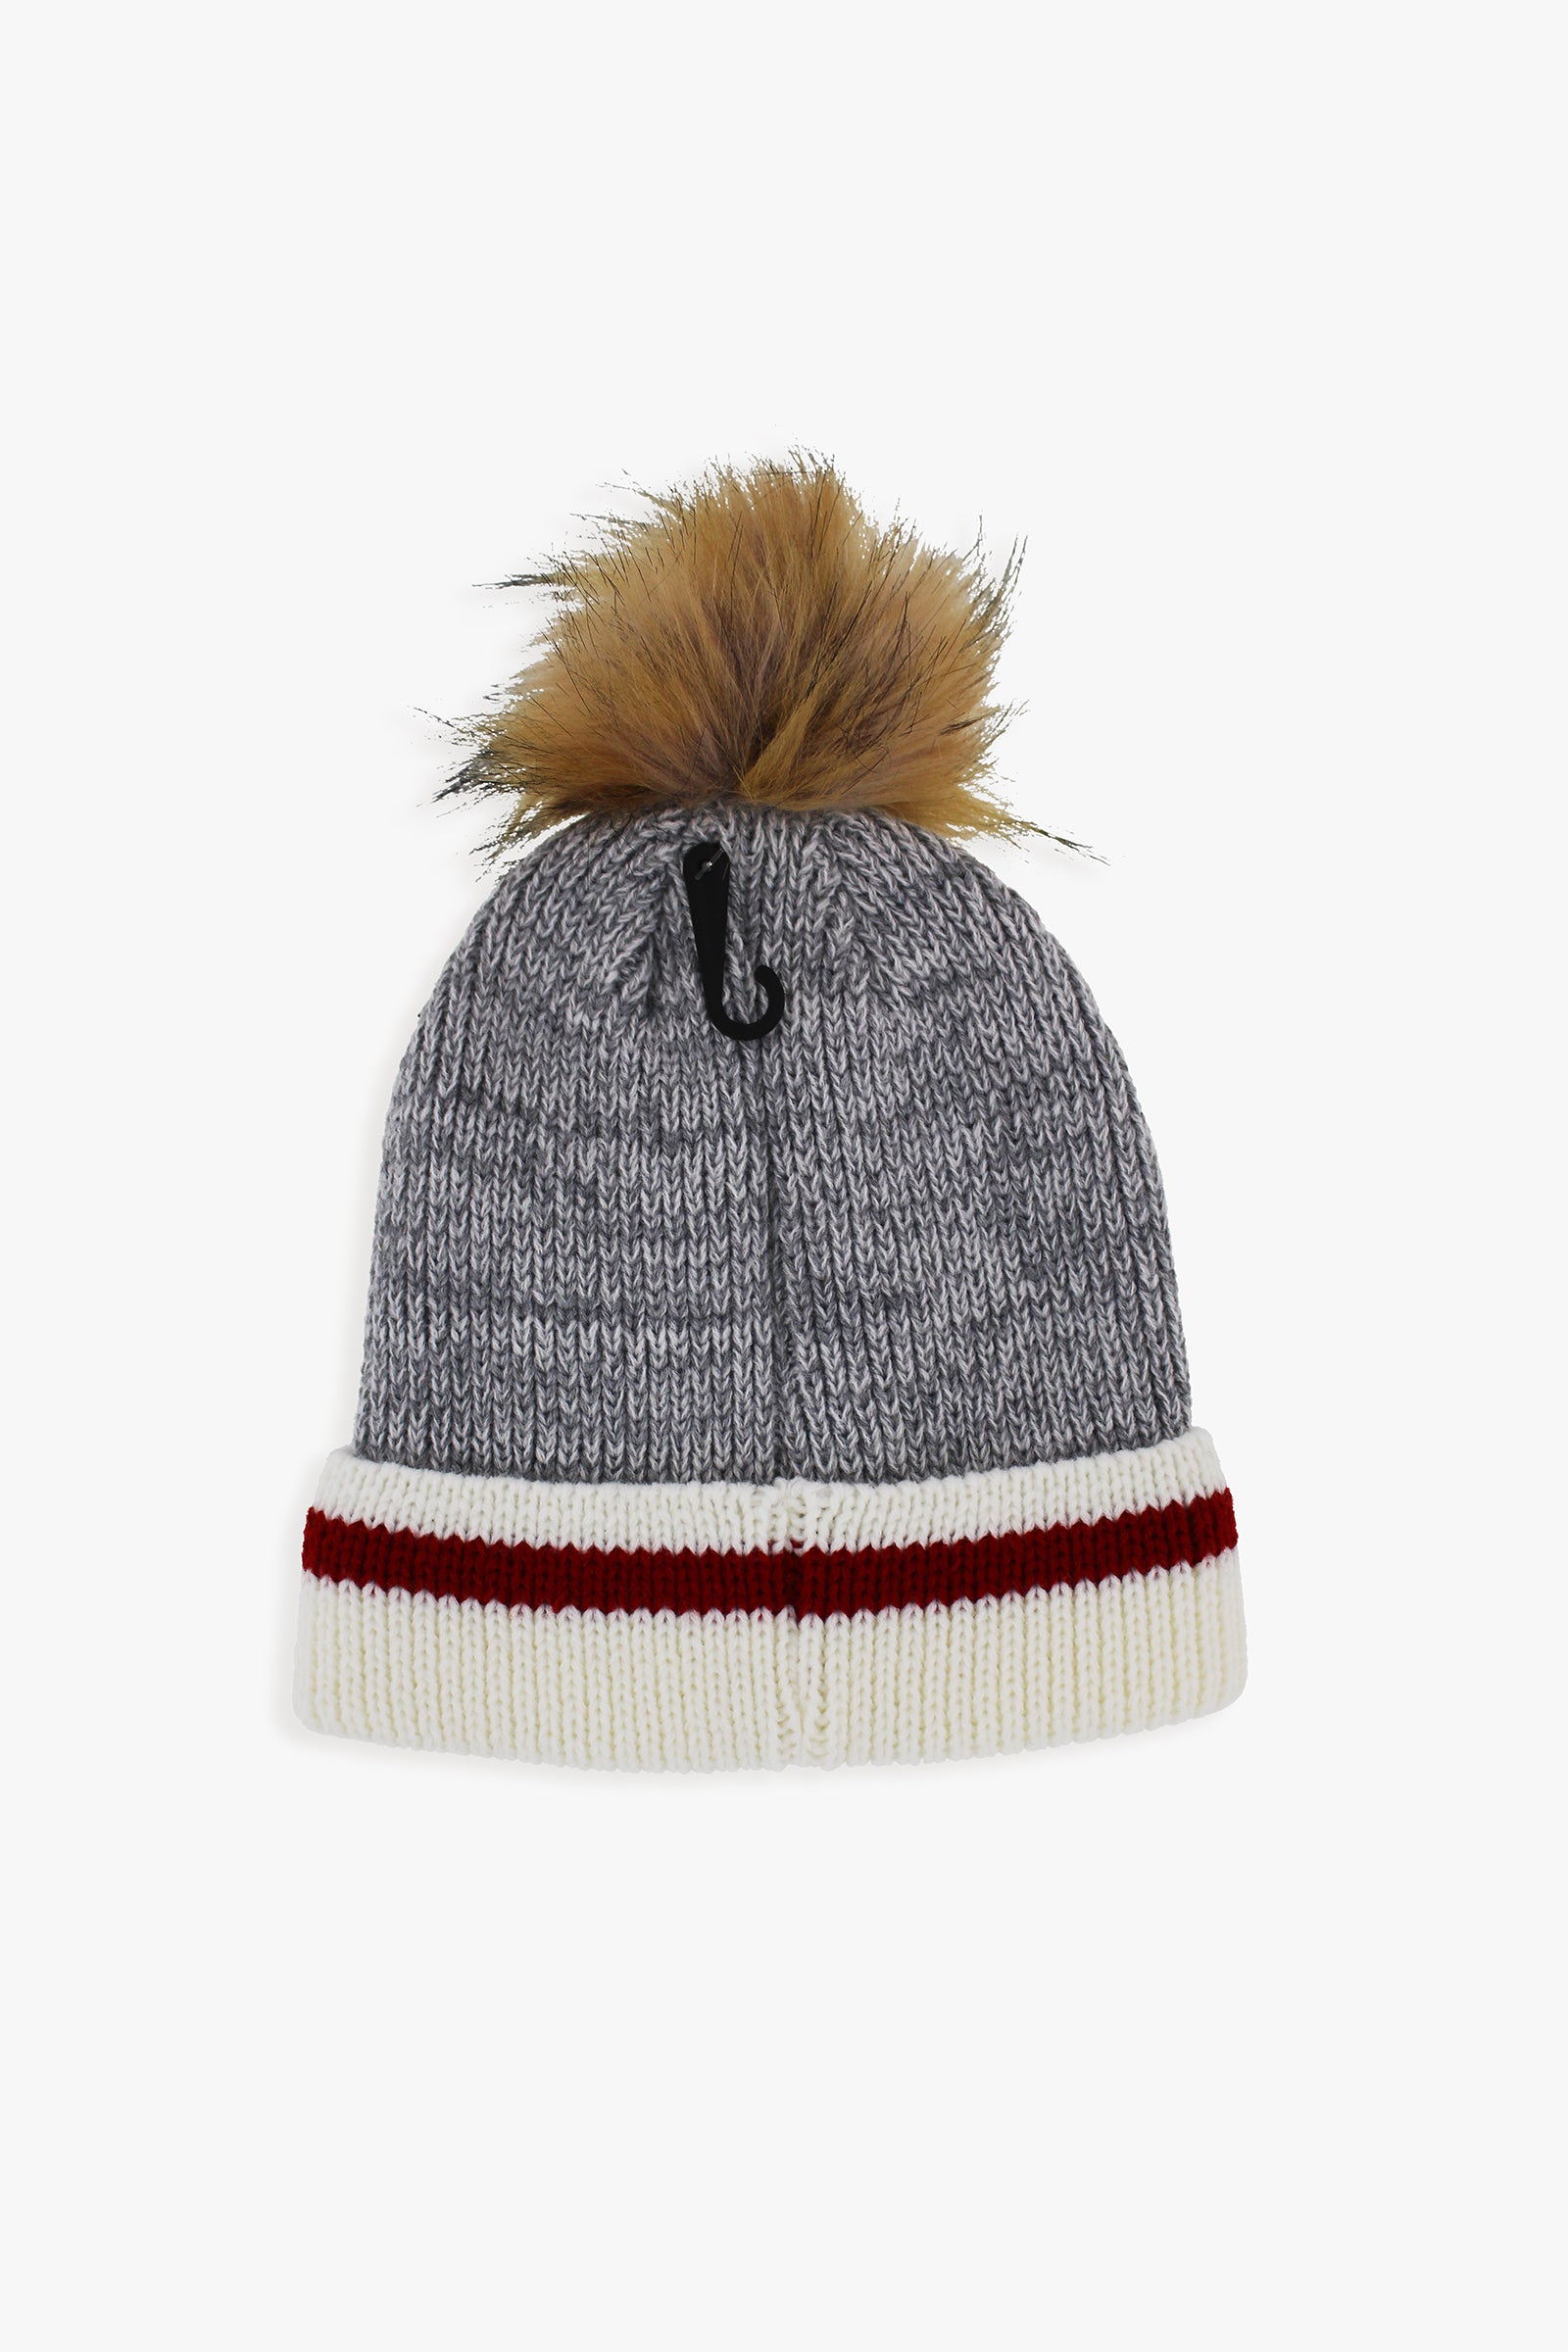 Adult Fleece Lined Toque With Faux Fur Pom